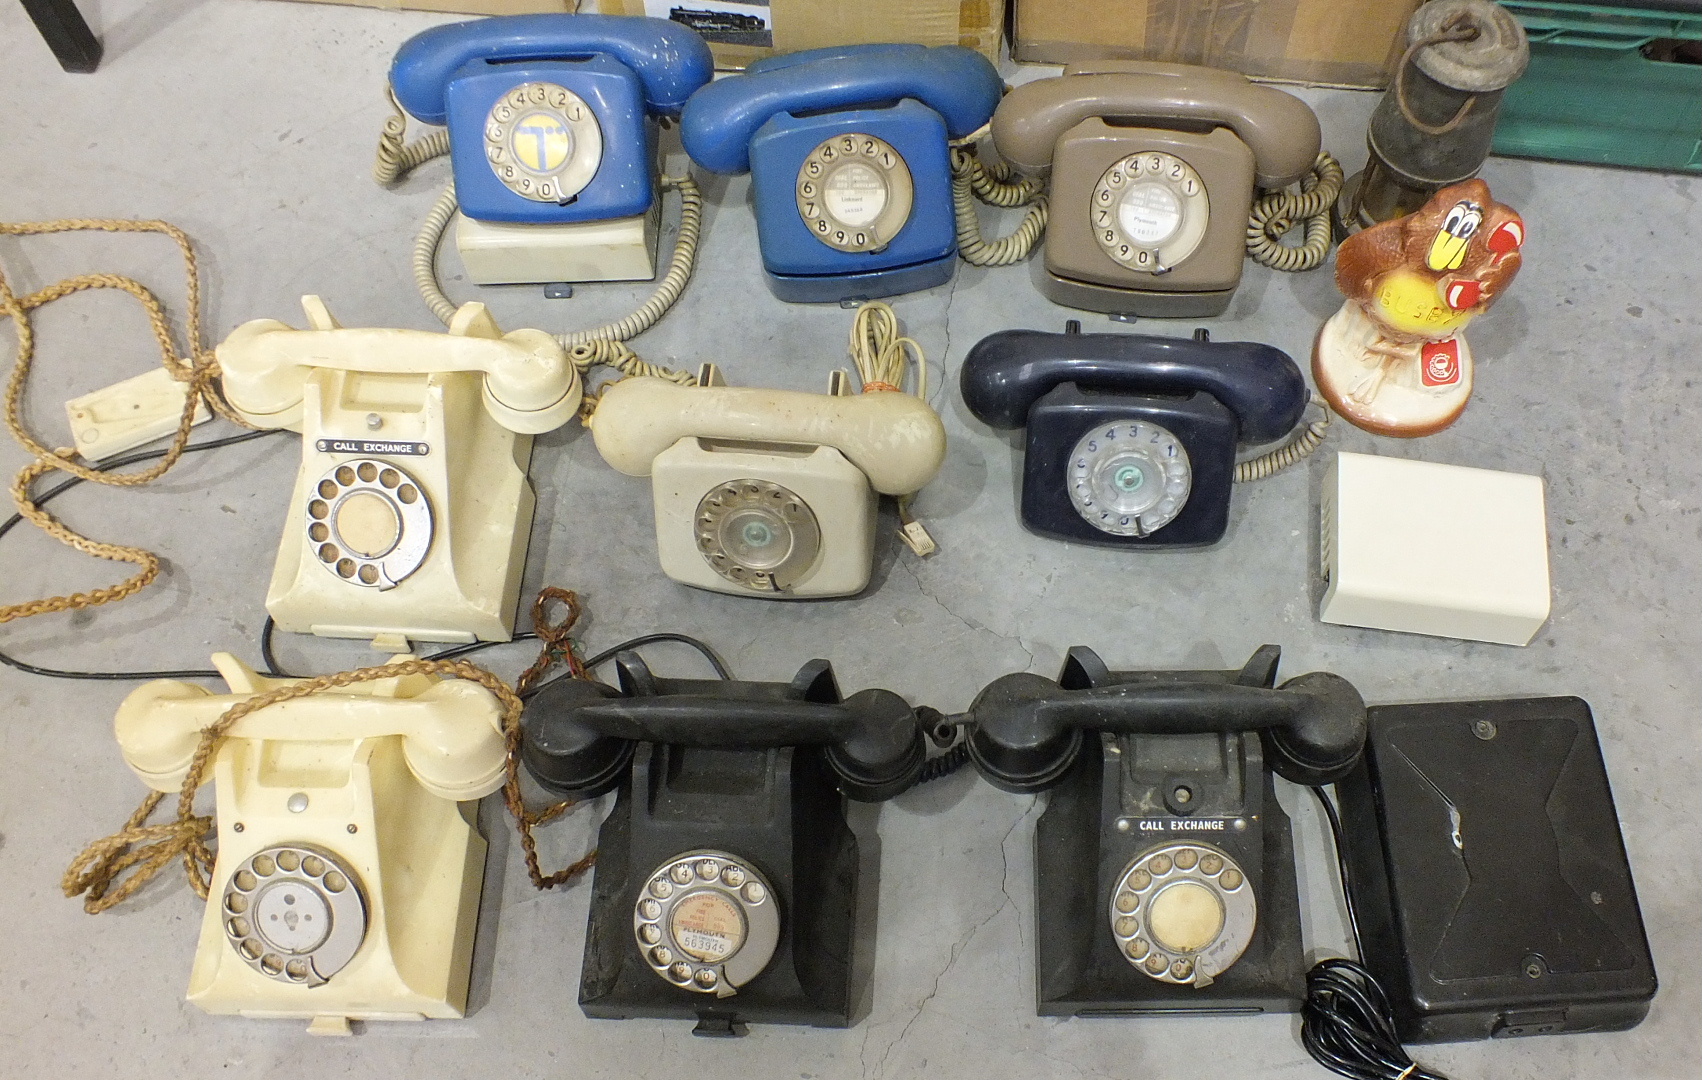 A collection of nine vintage GPO Bakelite telephones, including 332L, 312L, 312F (x2), etc.